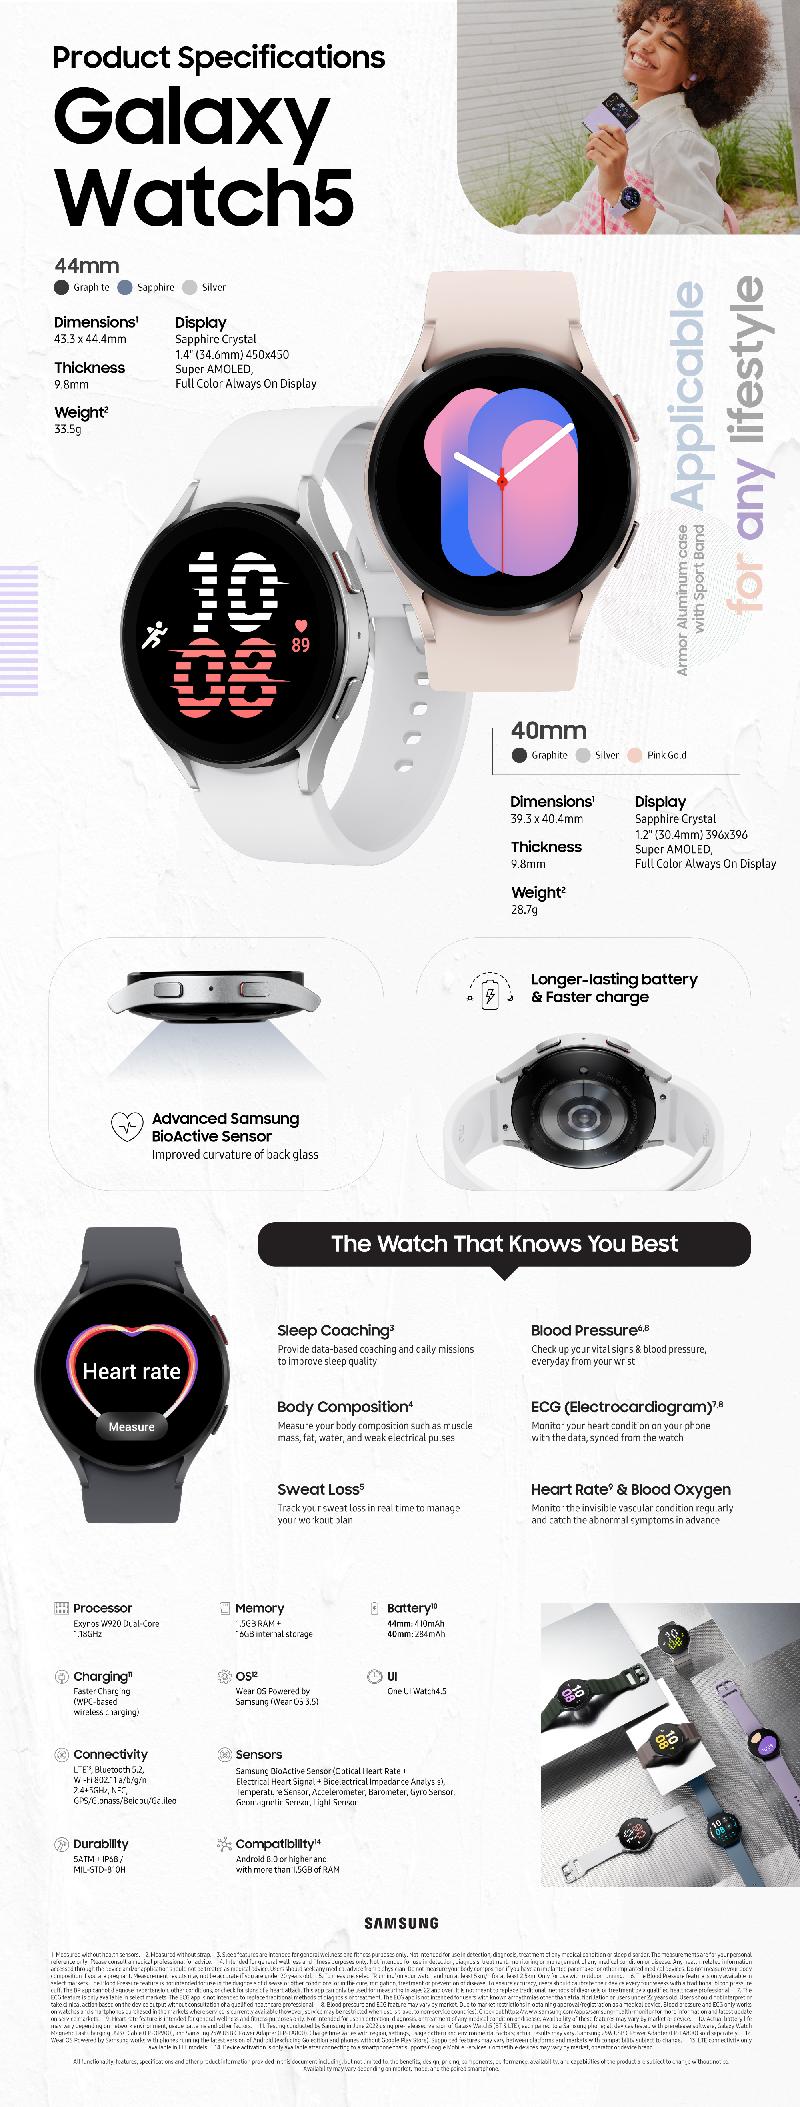 Galaxy_Watch5_Product Specifications.jpg